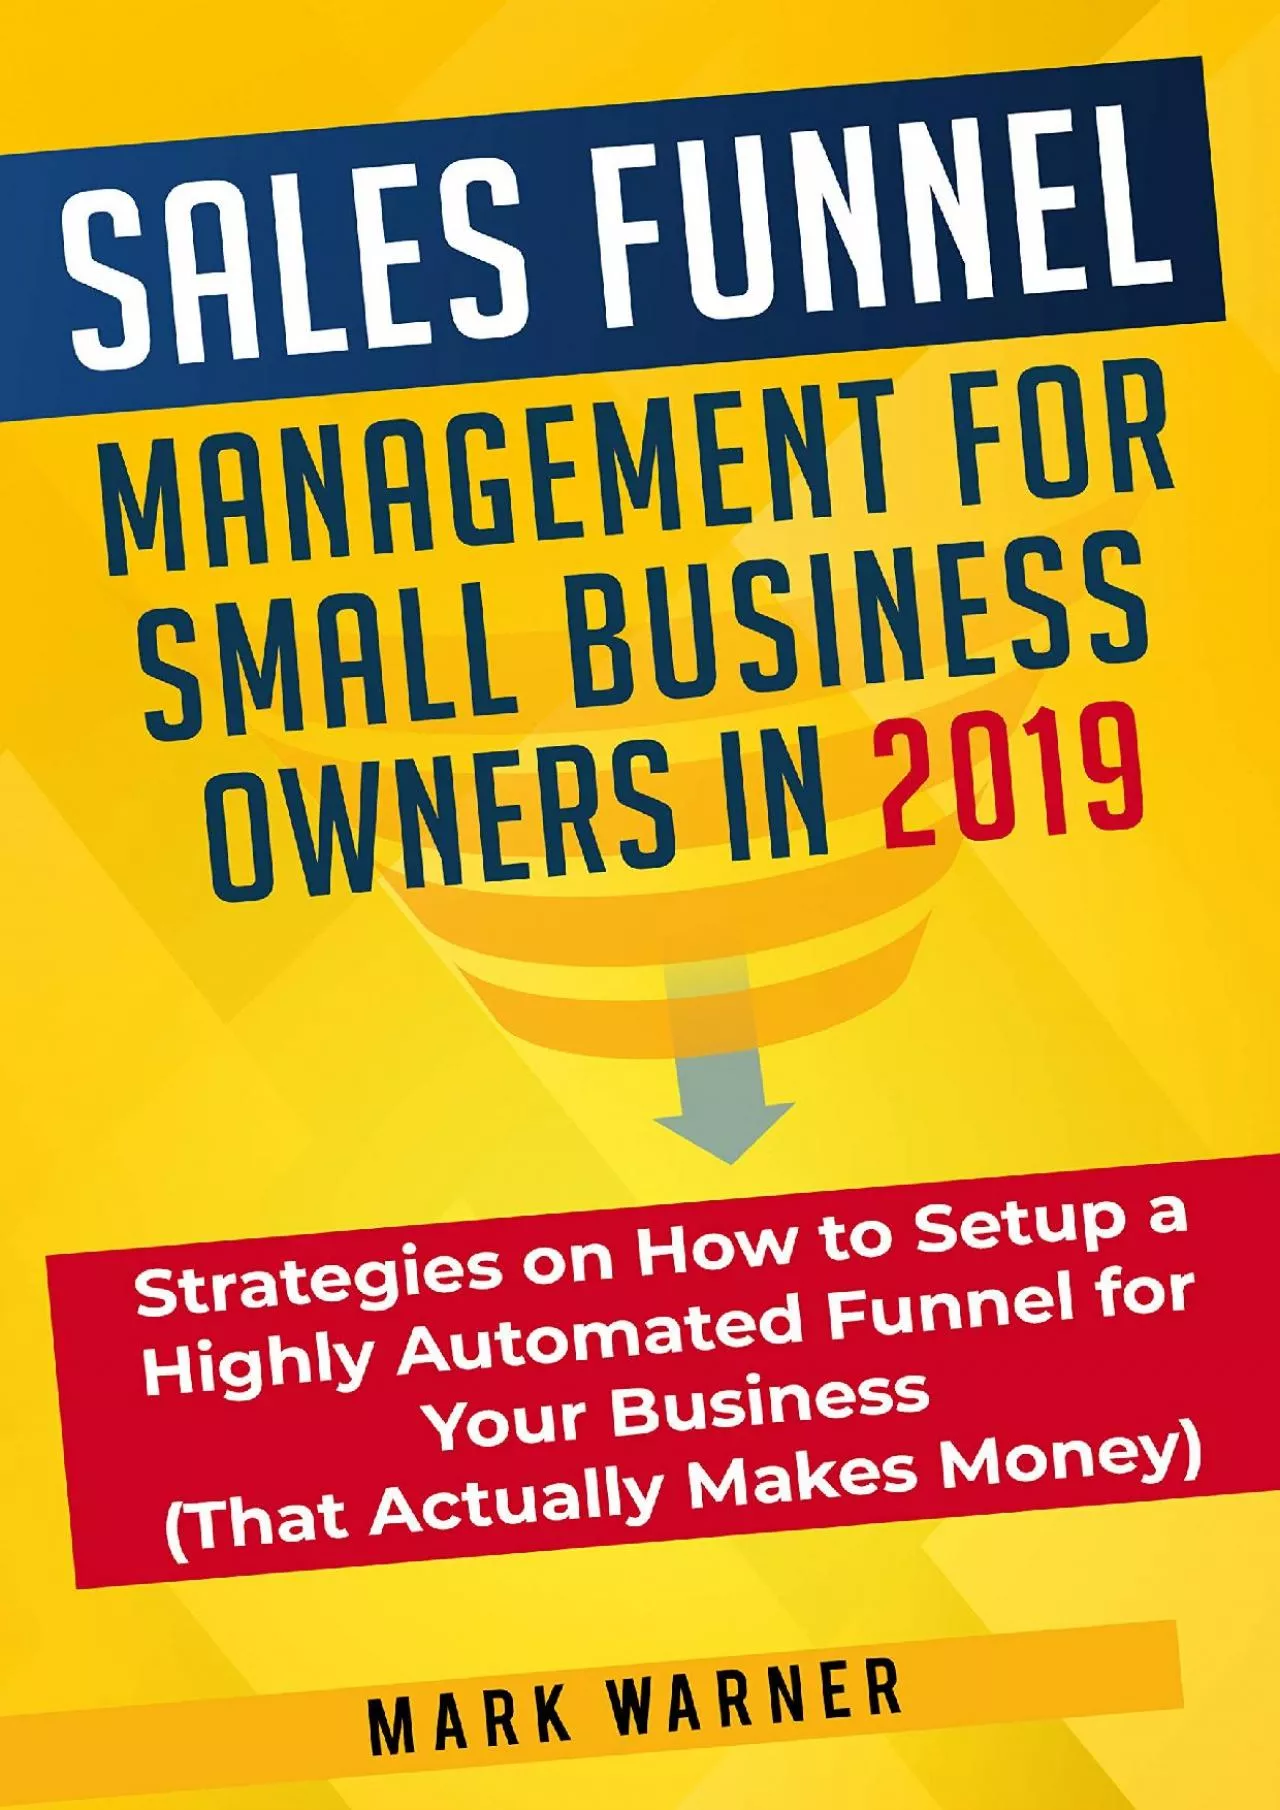 Sales Funnel Management for Small Business Owners in 2019: Strategies on How to Setup